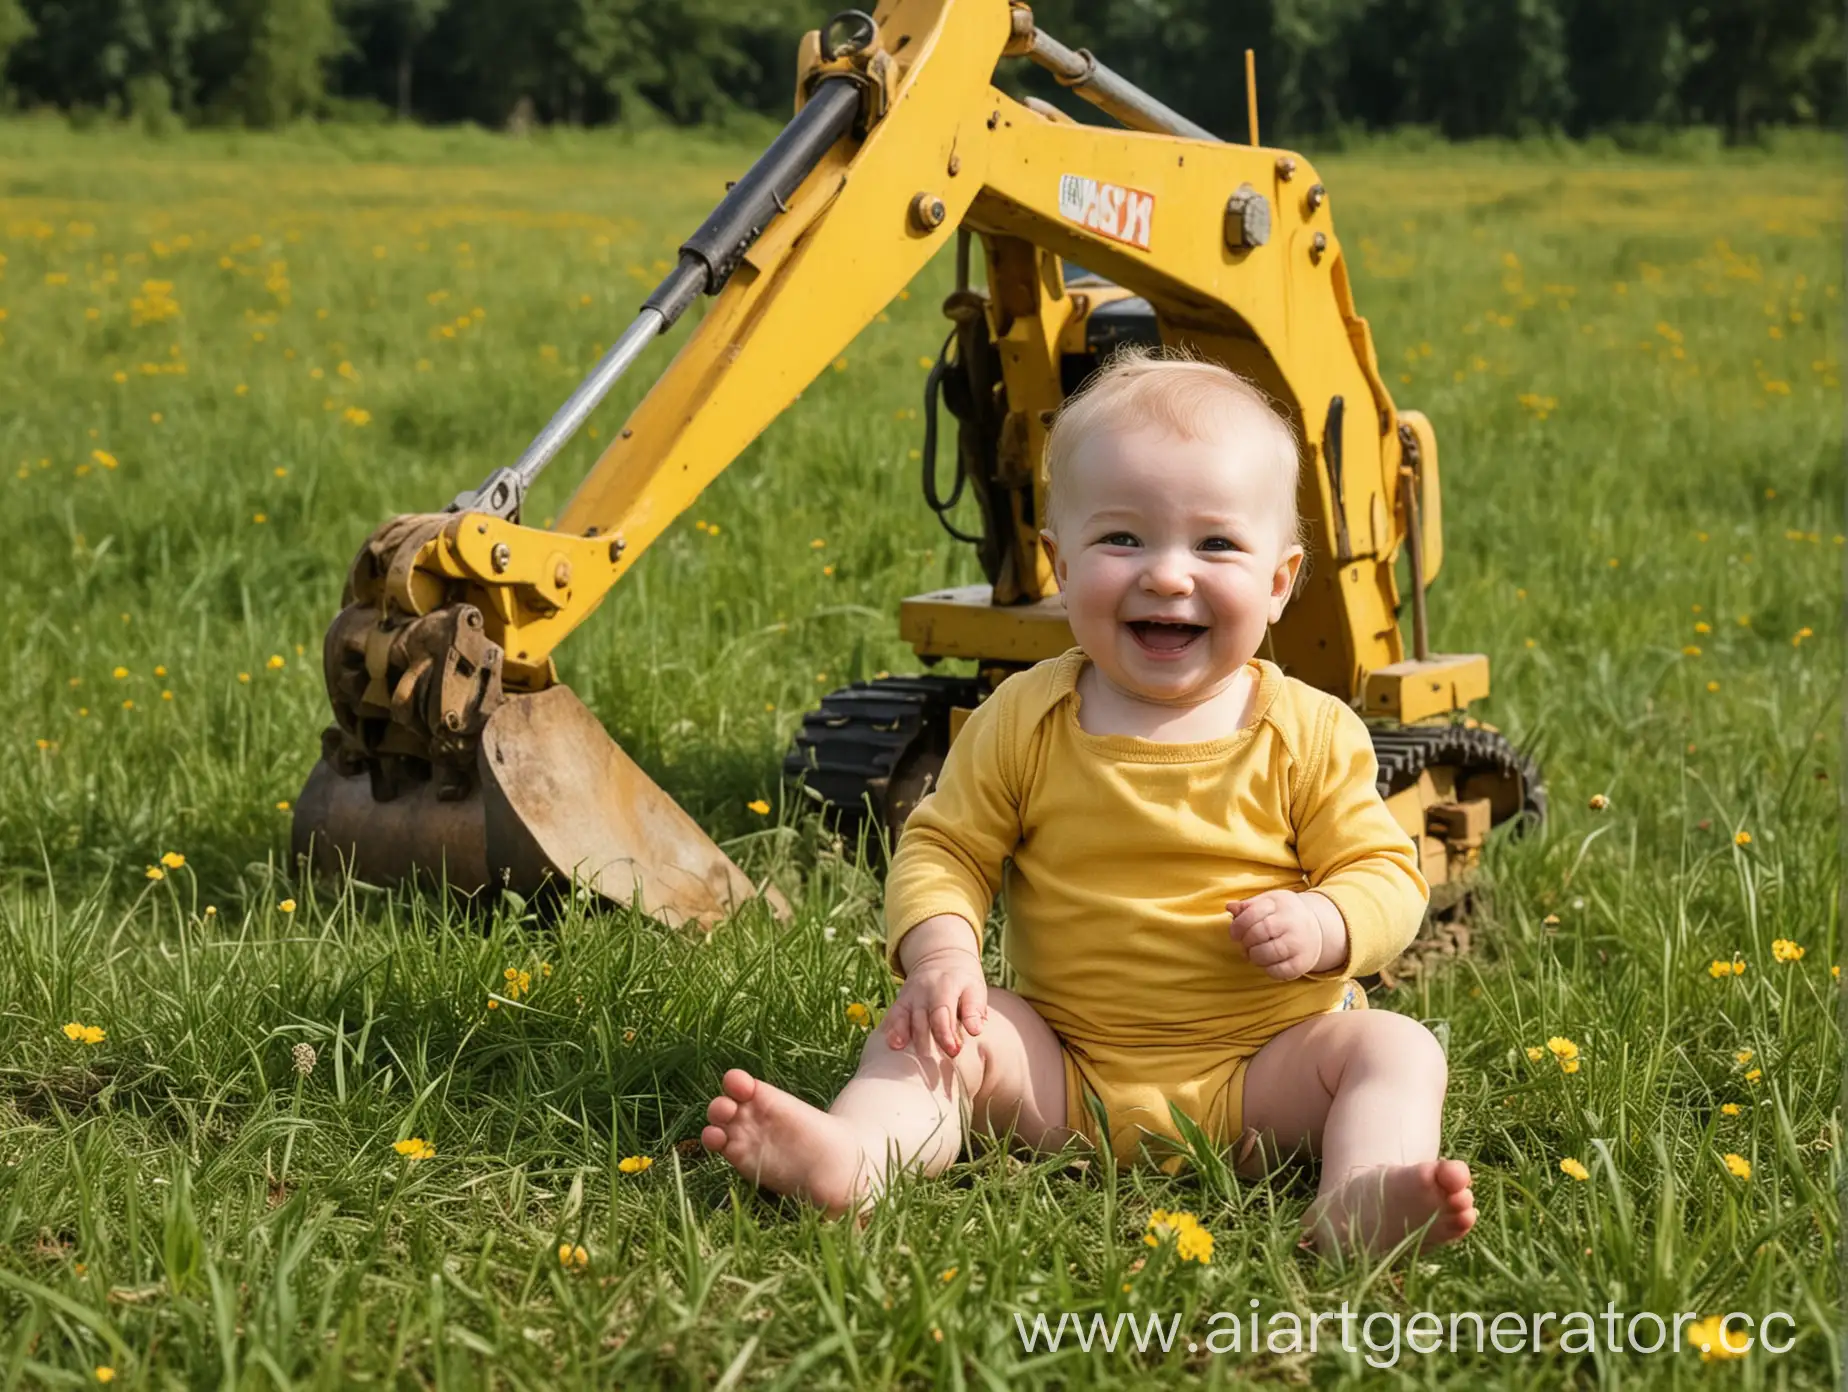 Laughing-Baby-on-Grass-with-Yellow-Excavator-in-Background